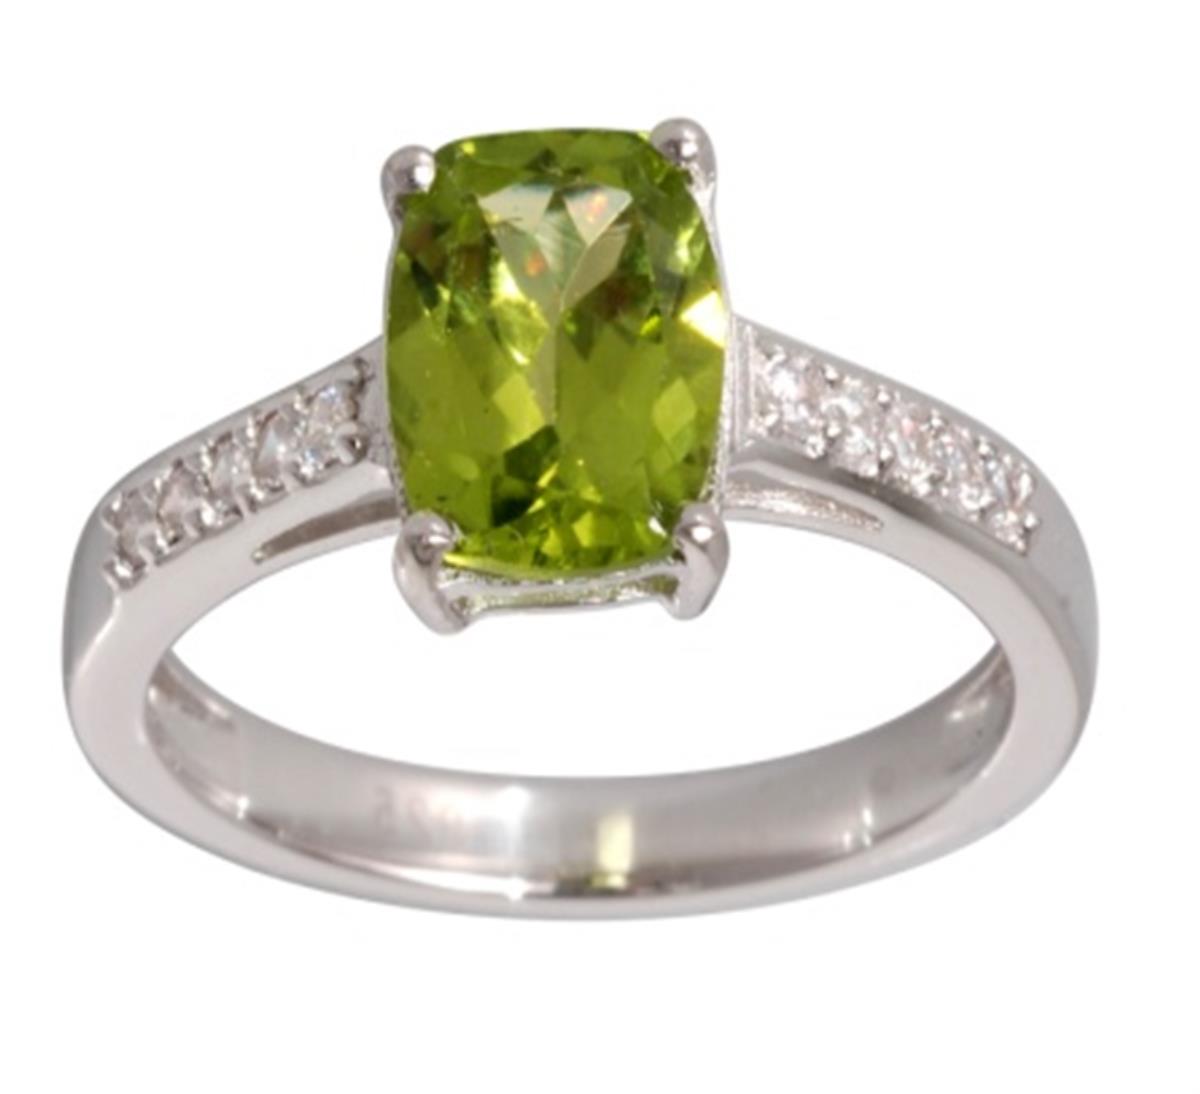 10K White Gold 9x7mm Cushion Cut Peridot with Paved White Zircon Sides Engagement Ring